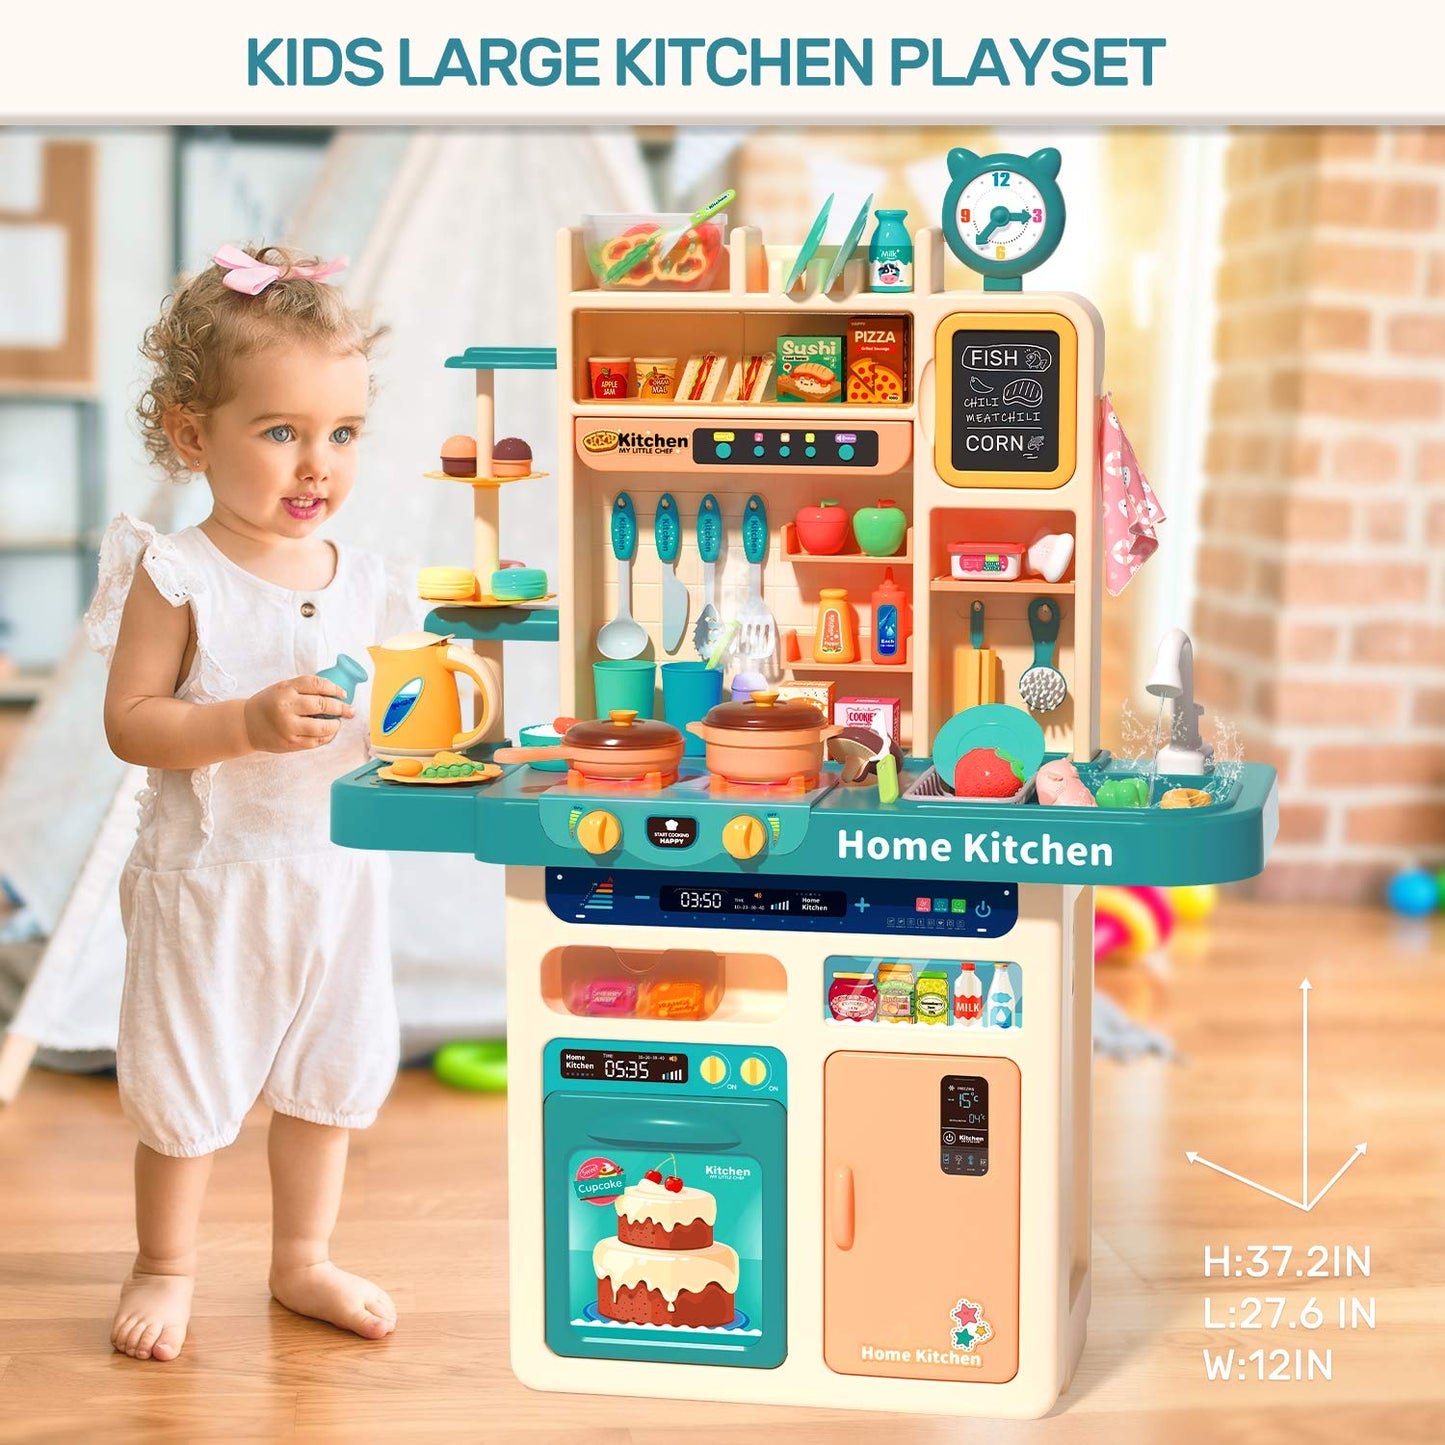 CUTE STONE 93PCS Kids Kitchen Playset with Lights, Sounds, Pretend Steam, Toy Sink Oven, Color Changing Food Toys, Kitchen Accessories Set